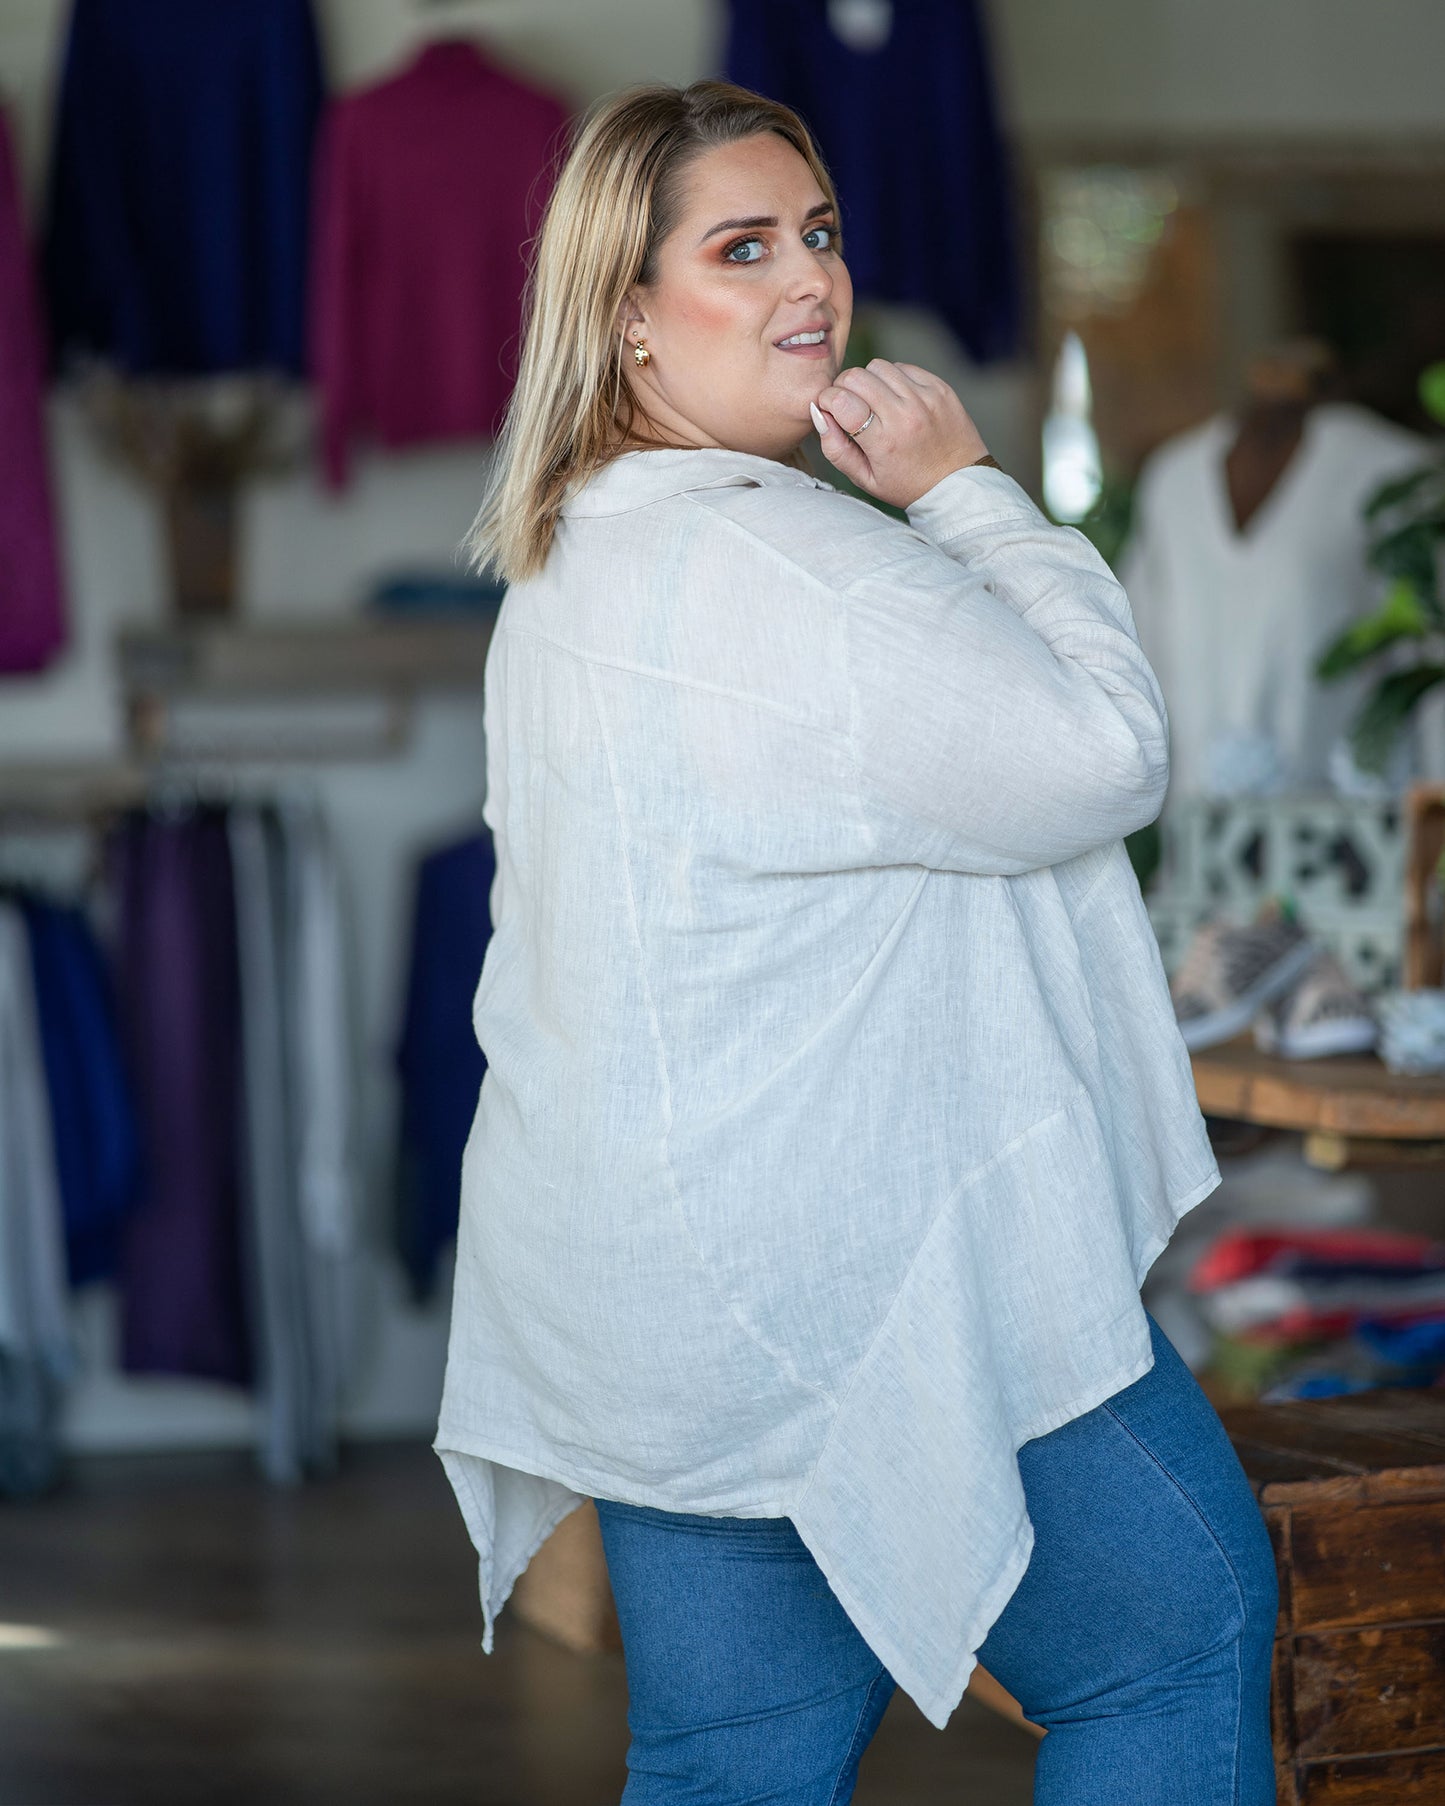 Collection: For The Love Of Linen ❤️ Crisp yet soft, a captivating combination you will fall in love with too. This top is very versatile with button down detail and a very flattering cut